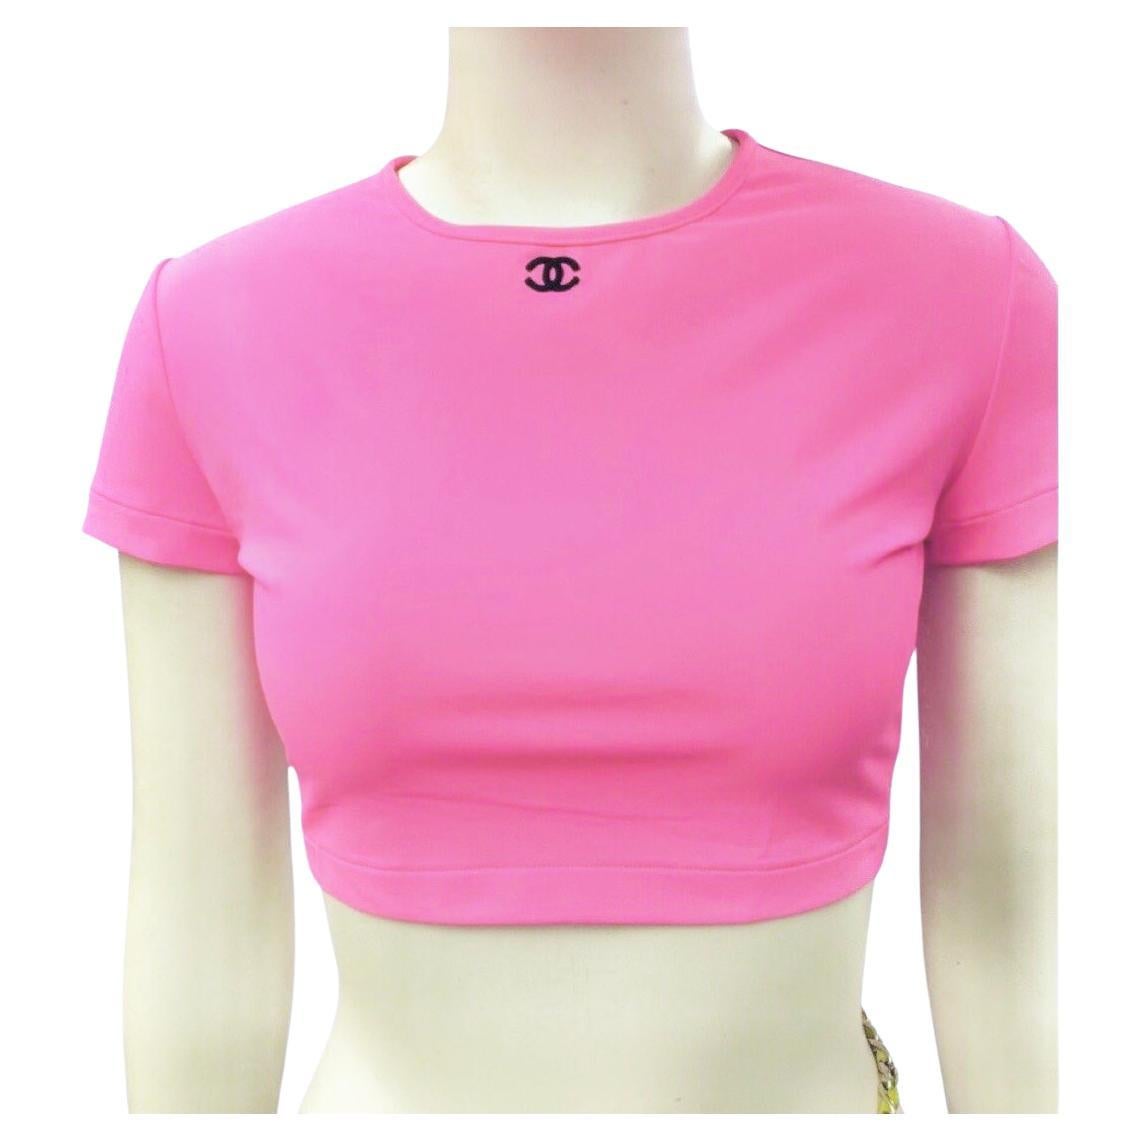 Chanel Shocking Neon Pink Cropped Top